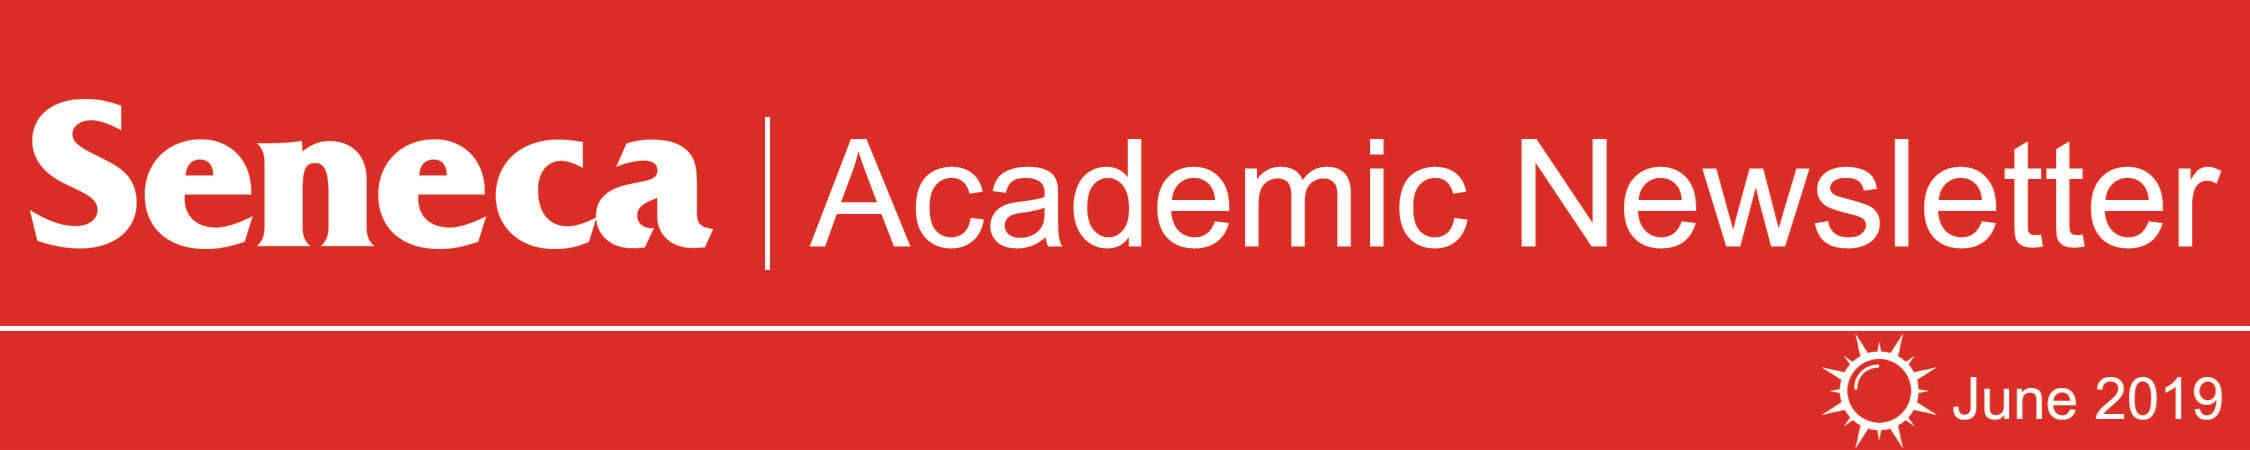 The header logo for the June 2019 issue of the Academic Newsletter